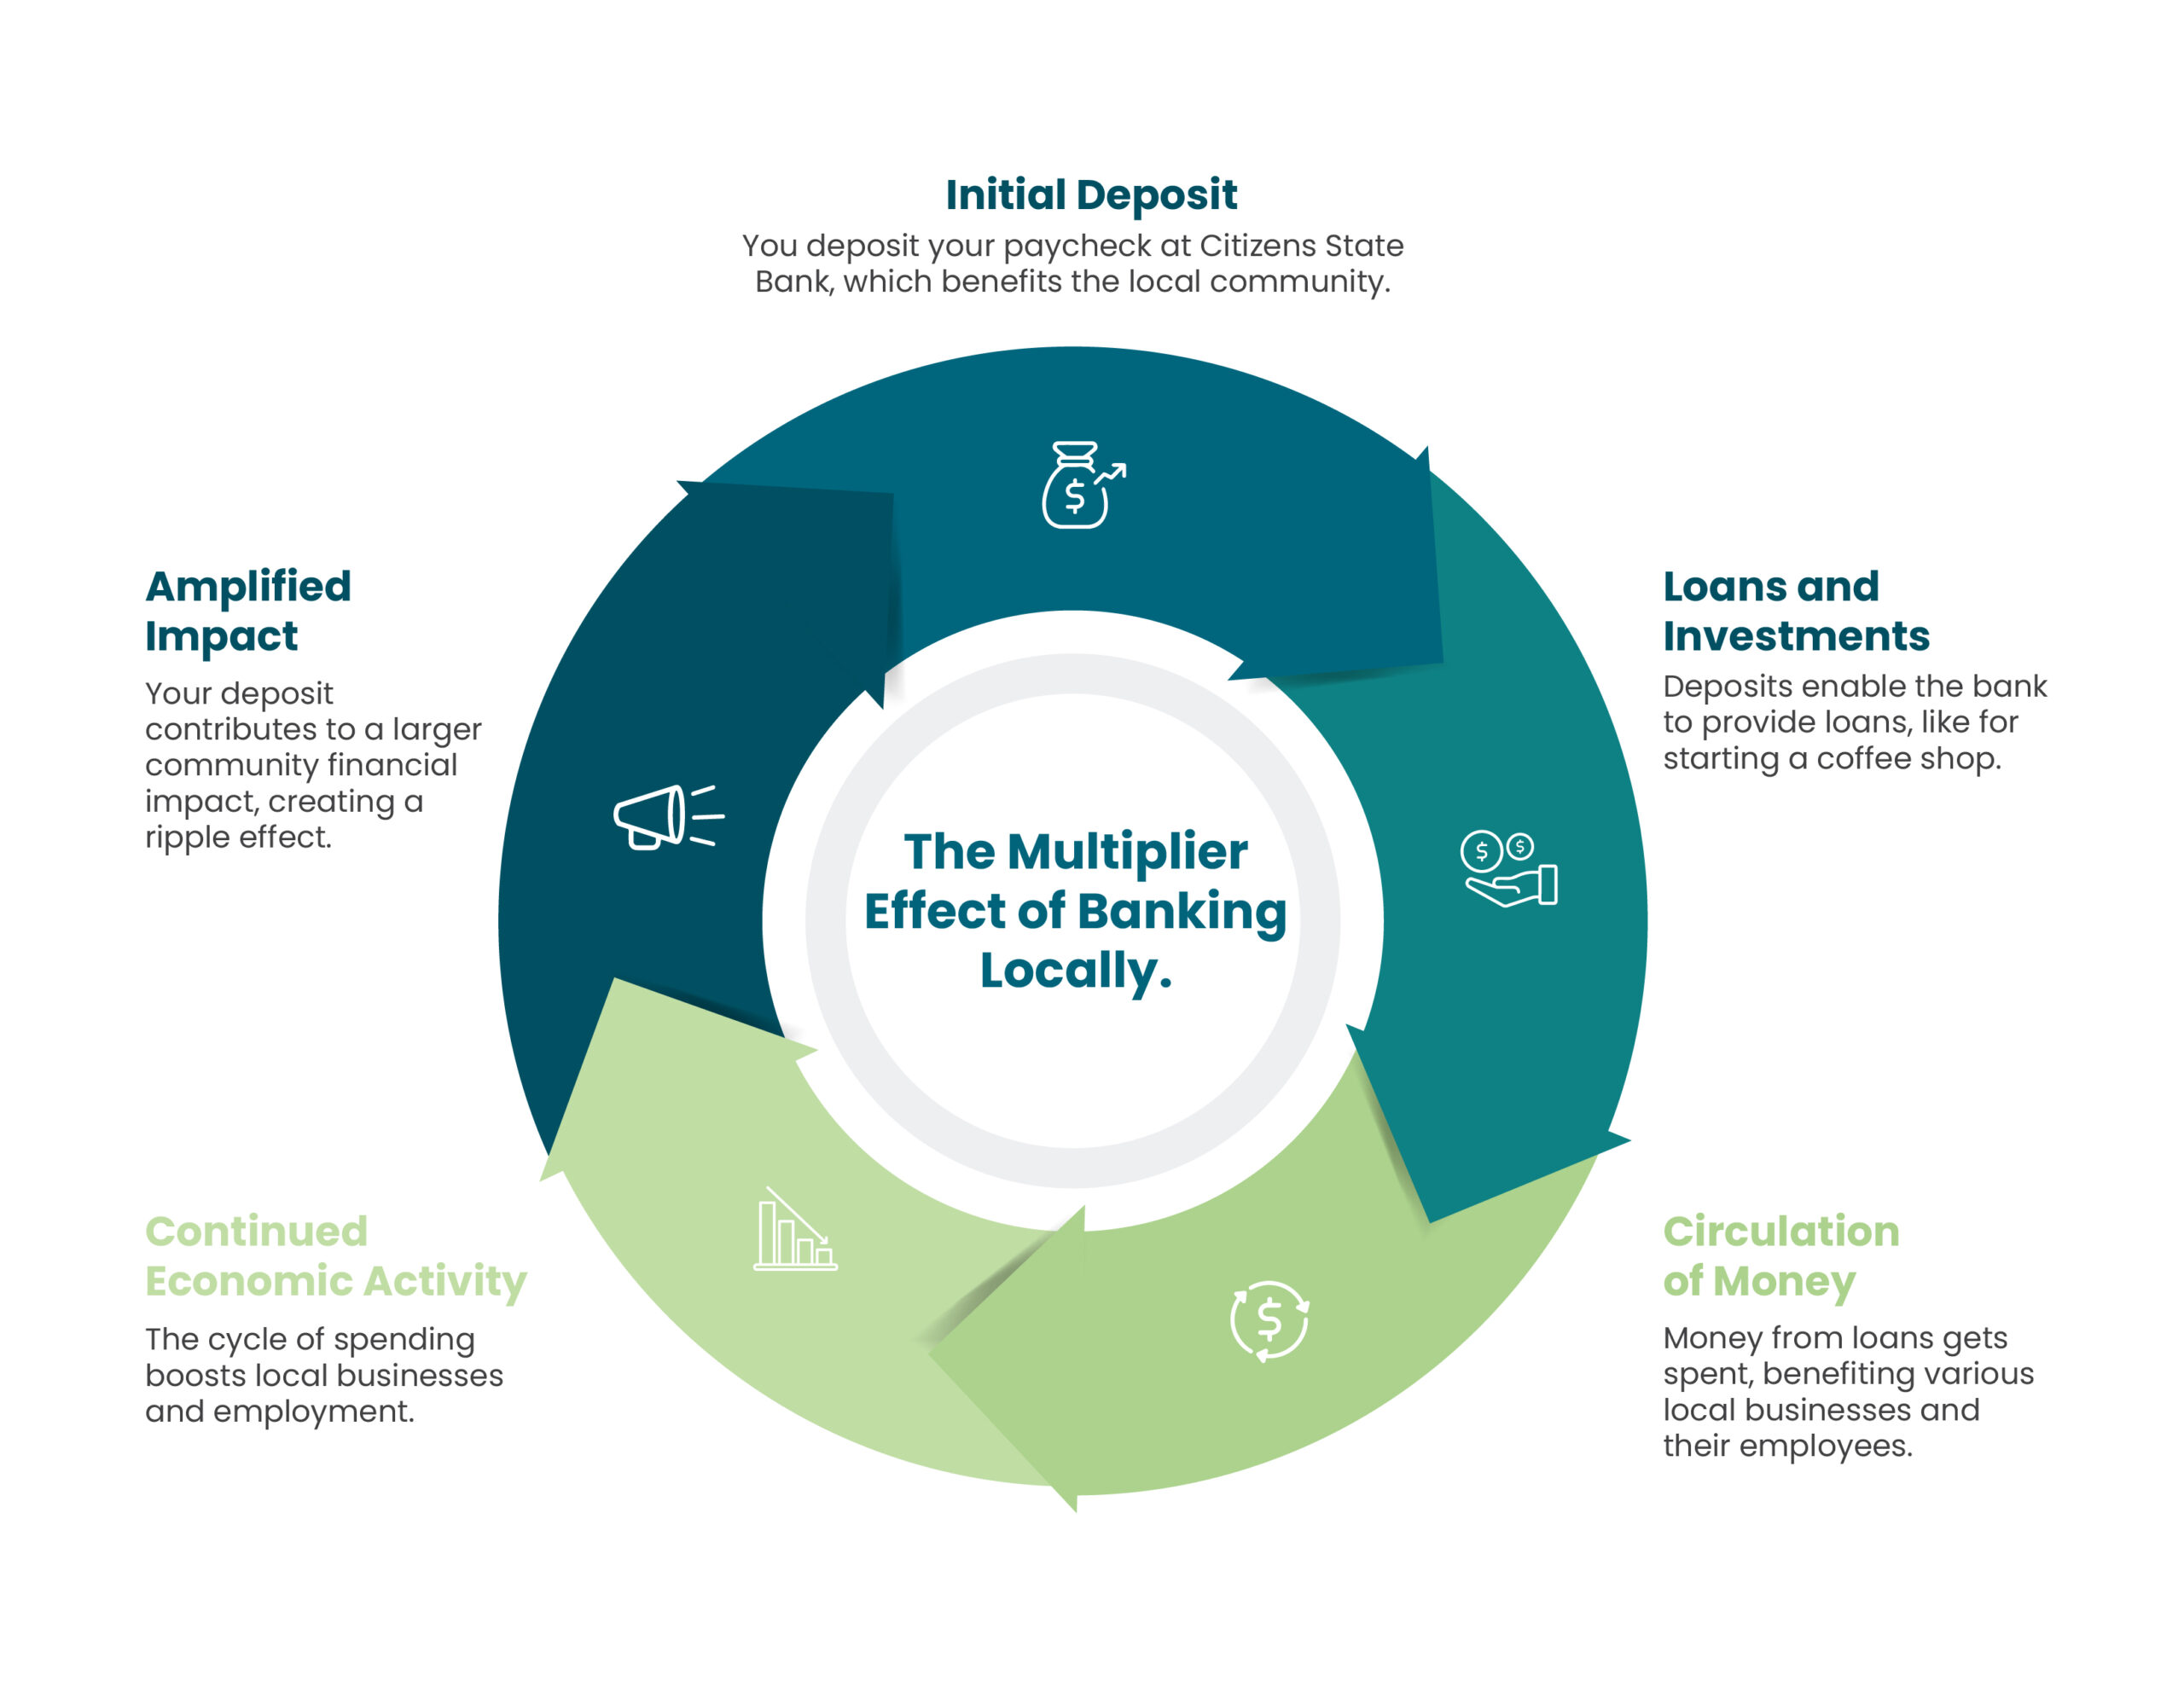 the multiplier effect of banking local